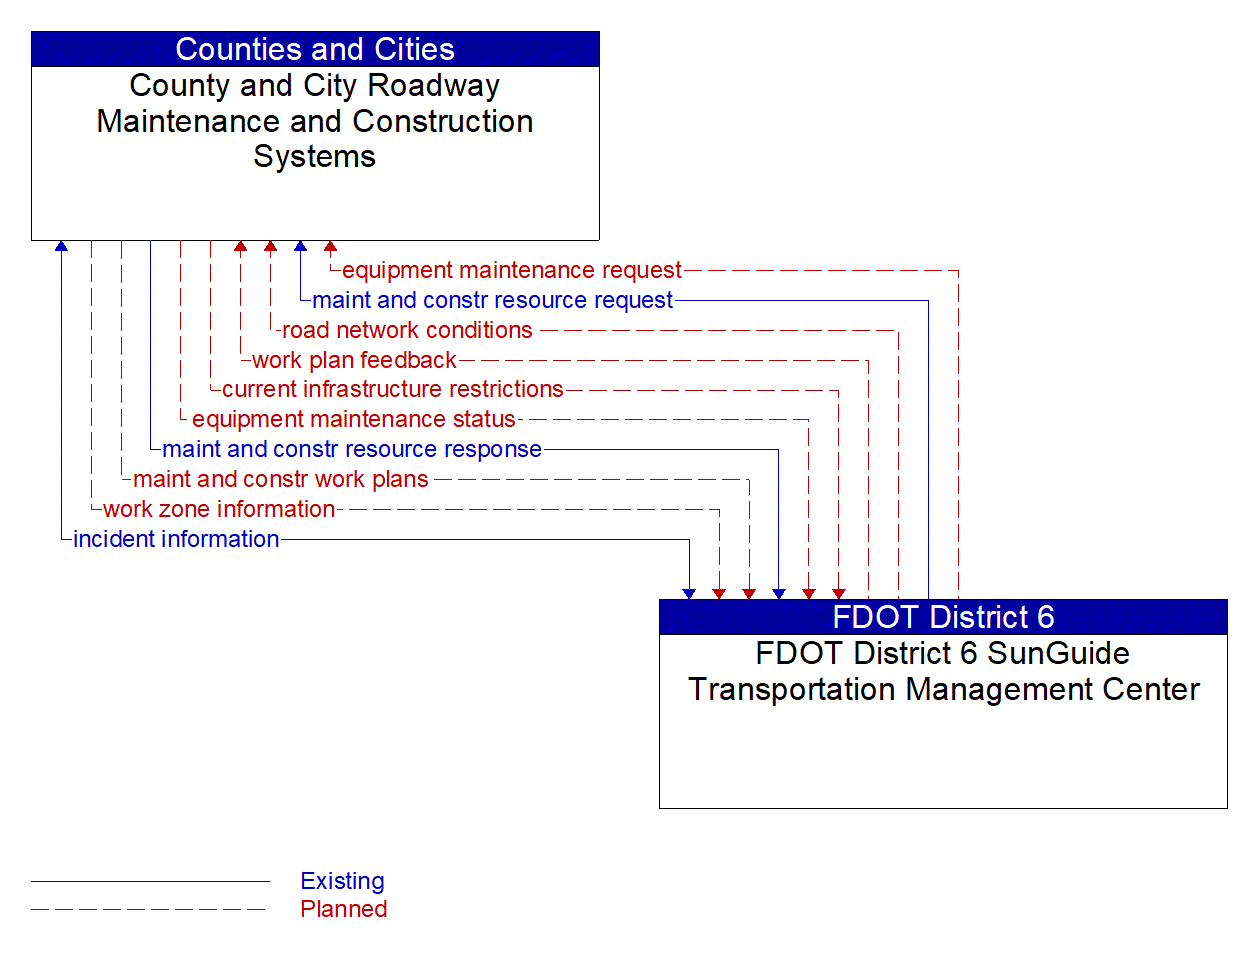 Architecture Flow Diagram: FDOT District 6 SunGuide Transportation Management Center <--> County and City Roadway Maintenance and Construction Systems